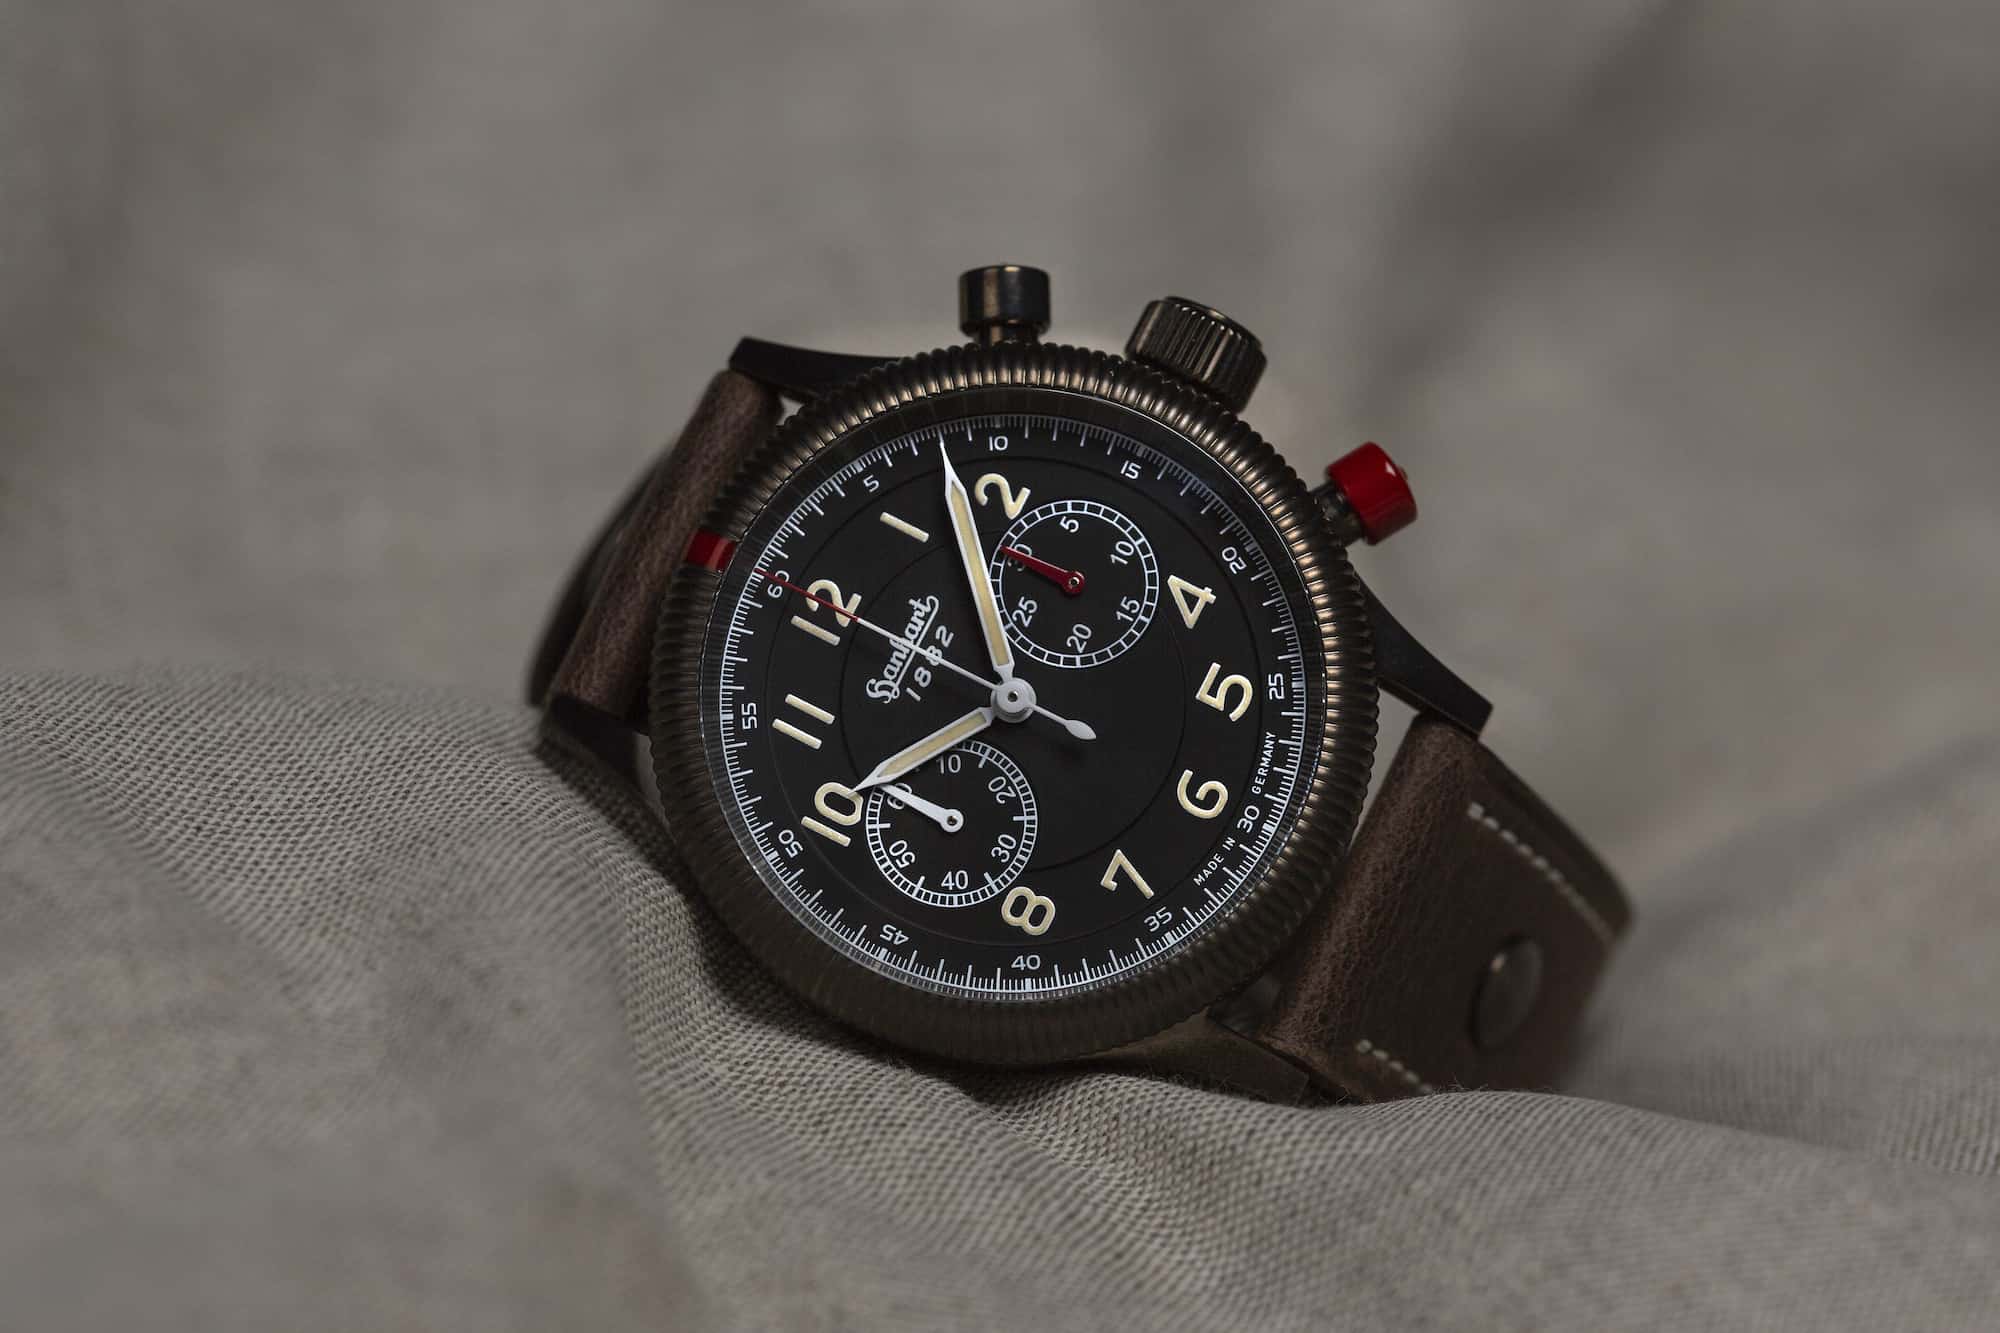 Introducing the Hanhart Pioneer Valjoux 23 Flyback Featuring NOS Movements